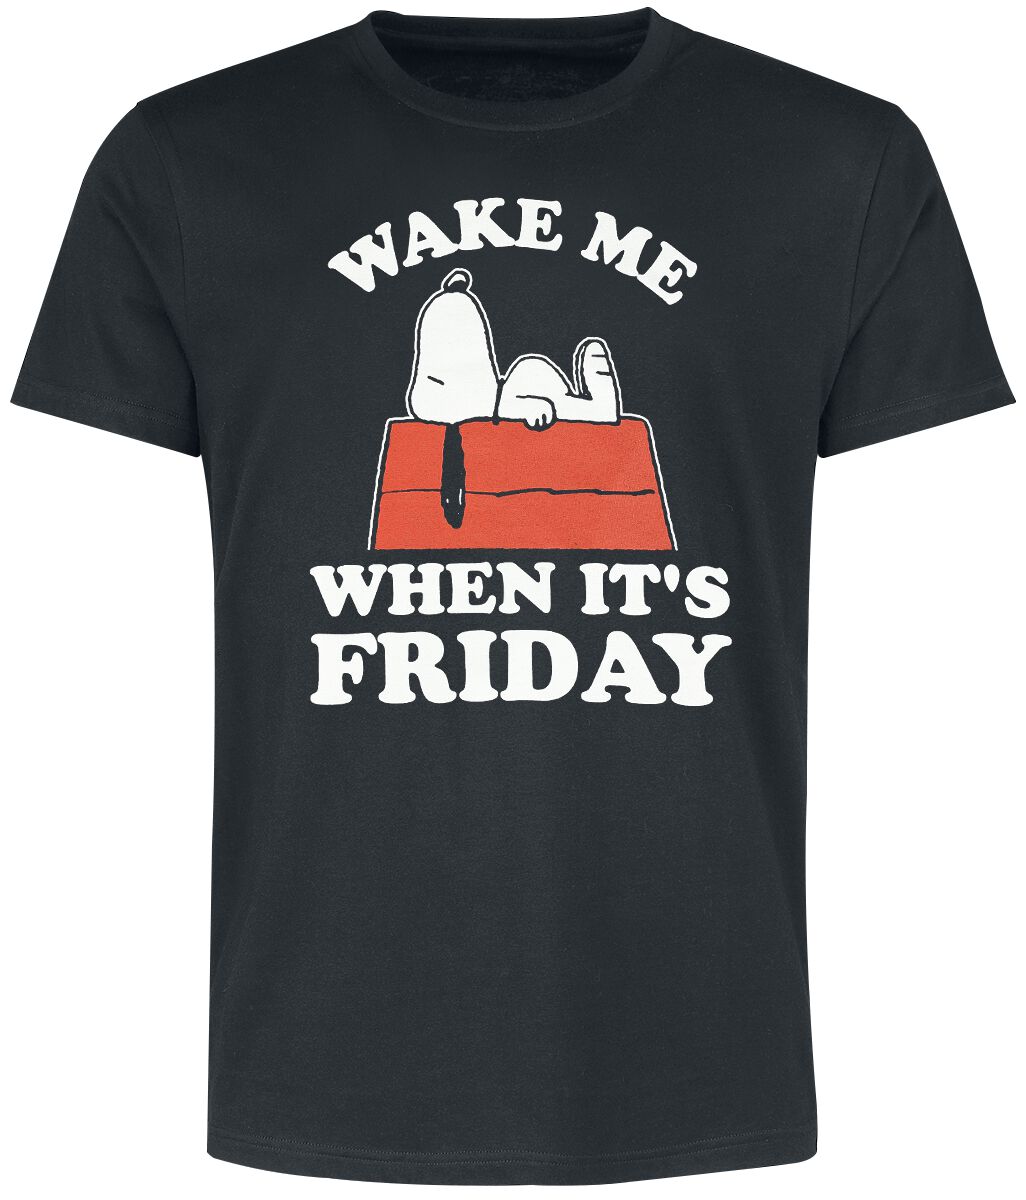 Peanuts Snoopy - Wake Me When It´s Friday T-Shirt schwarz in M